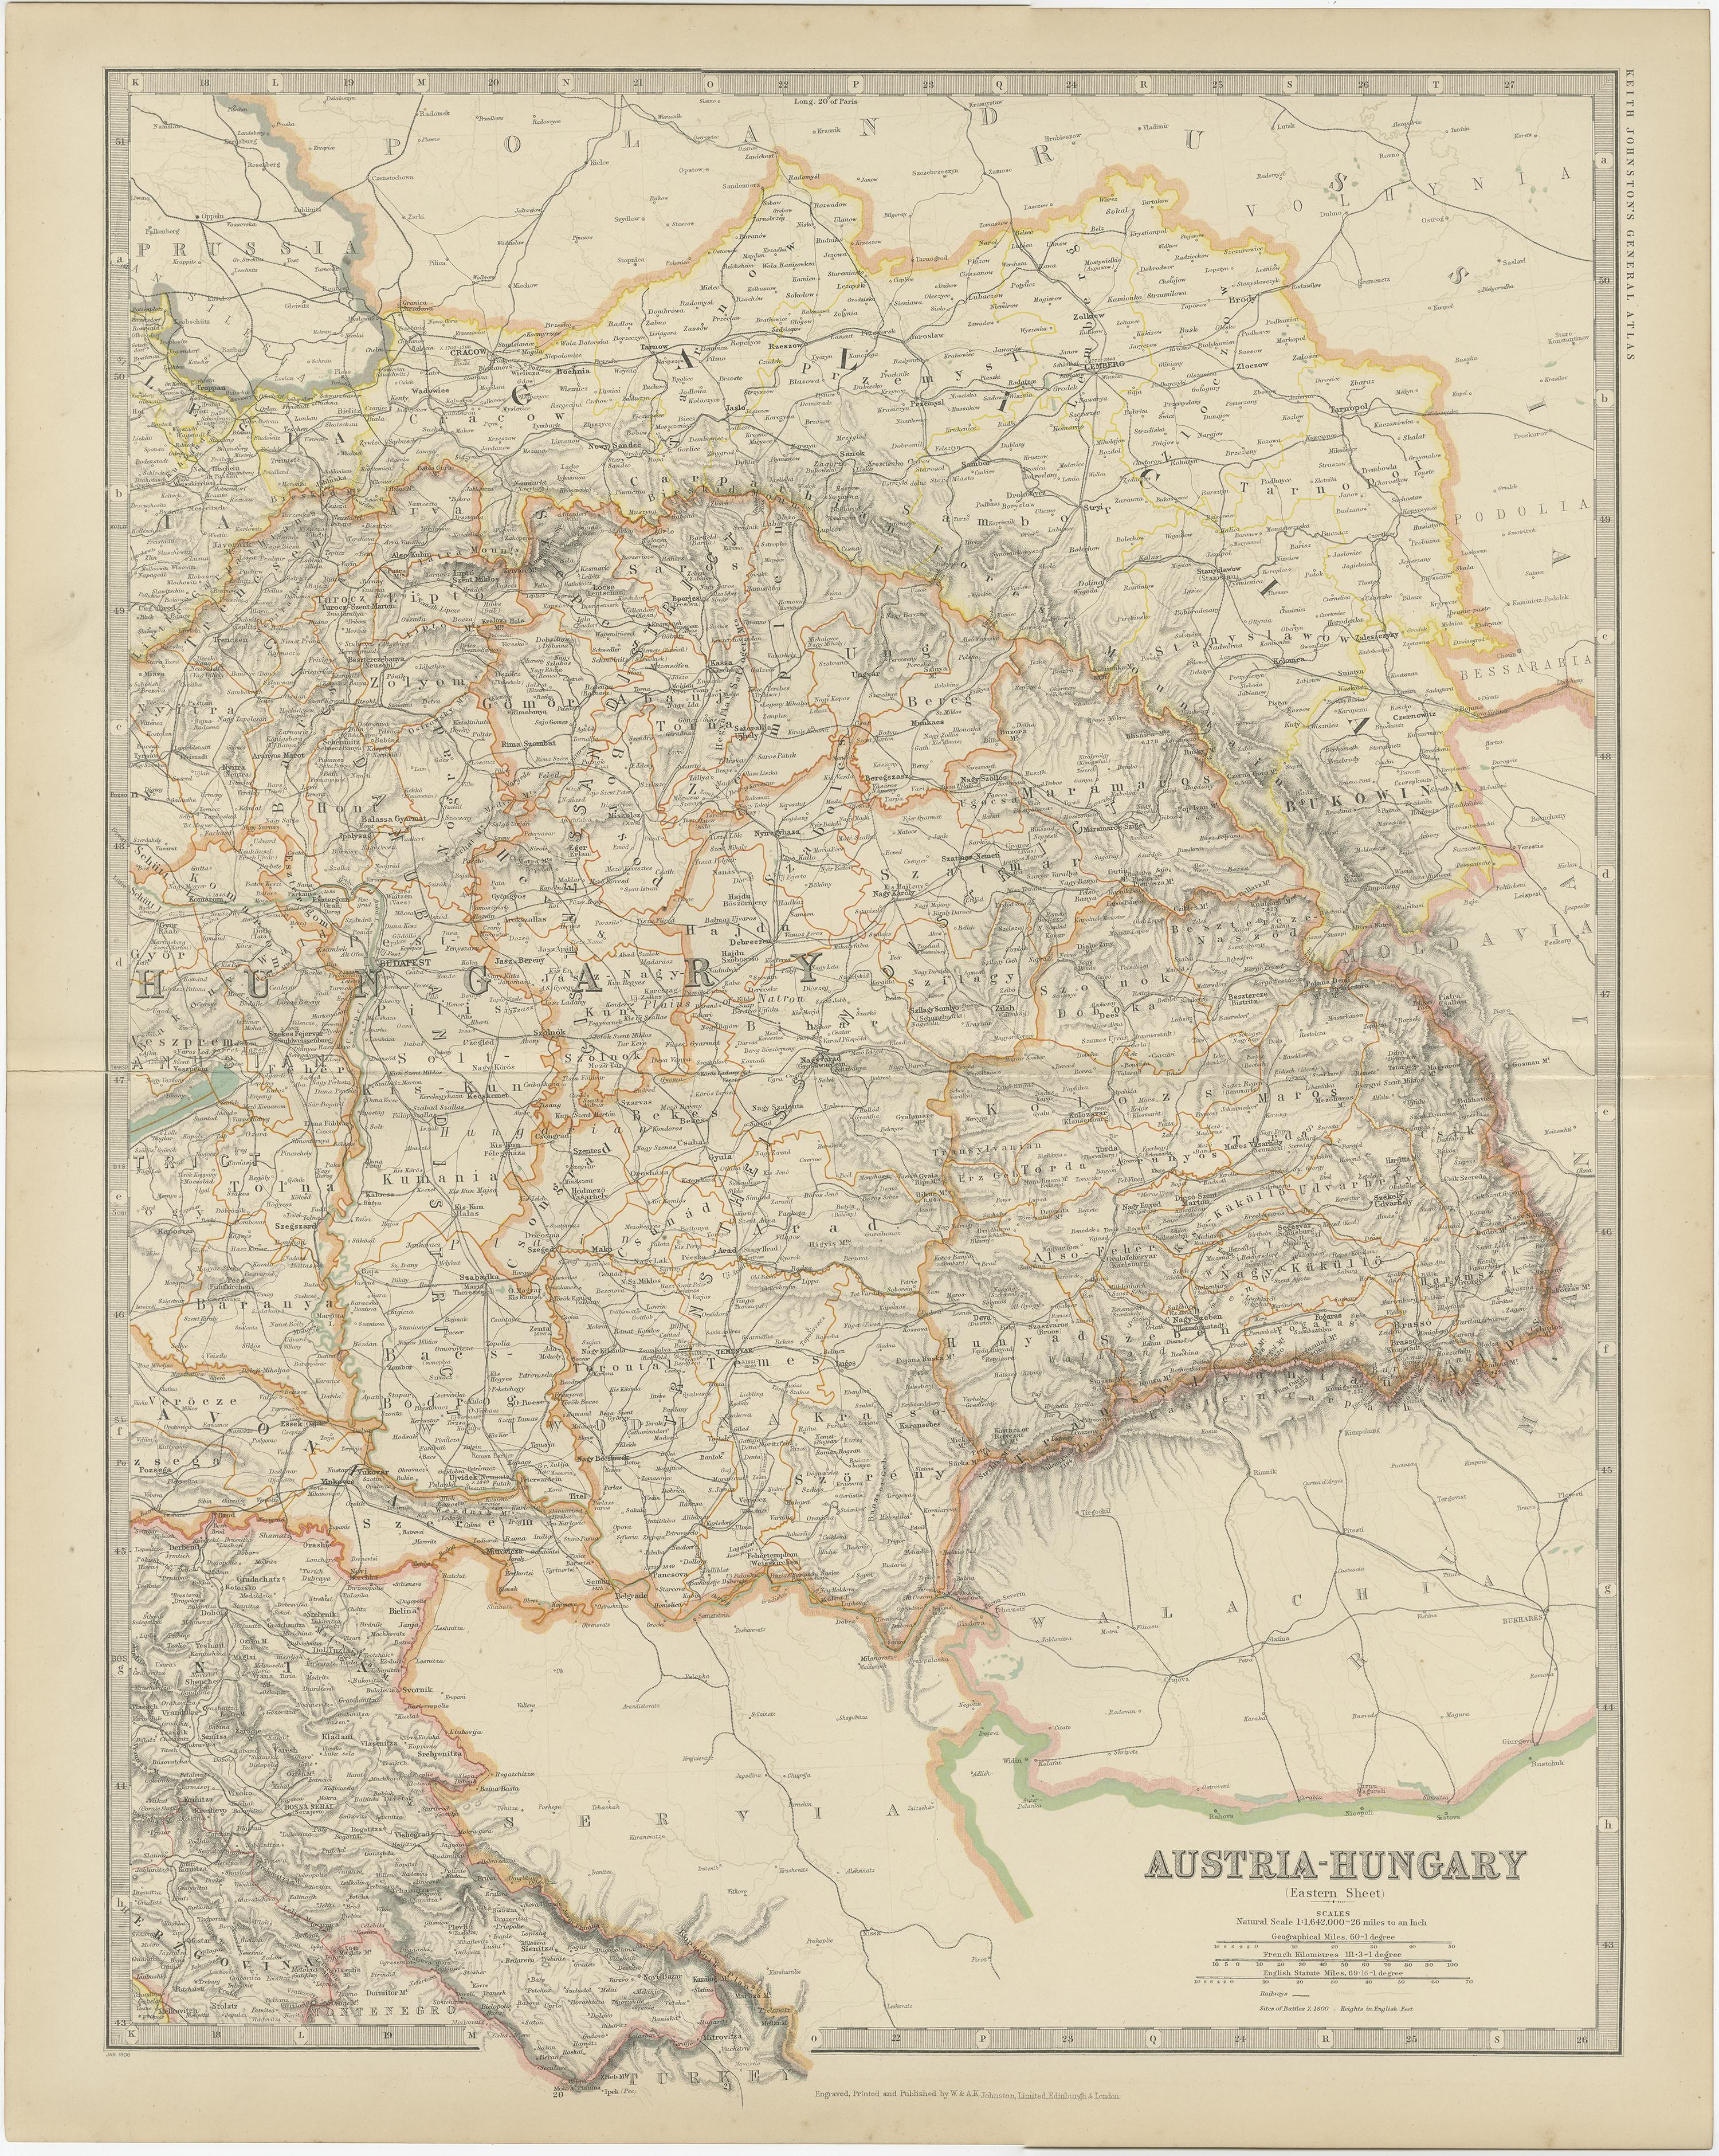 Antique map titled 'Austria- Hungary'. Original antique map of Austria- Hungary. This map originates from the ‘Royal Atlas of Modern Geography’. Published by W. & A.K. Johnston, 1909.